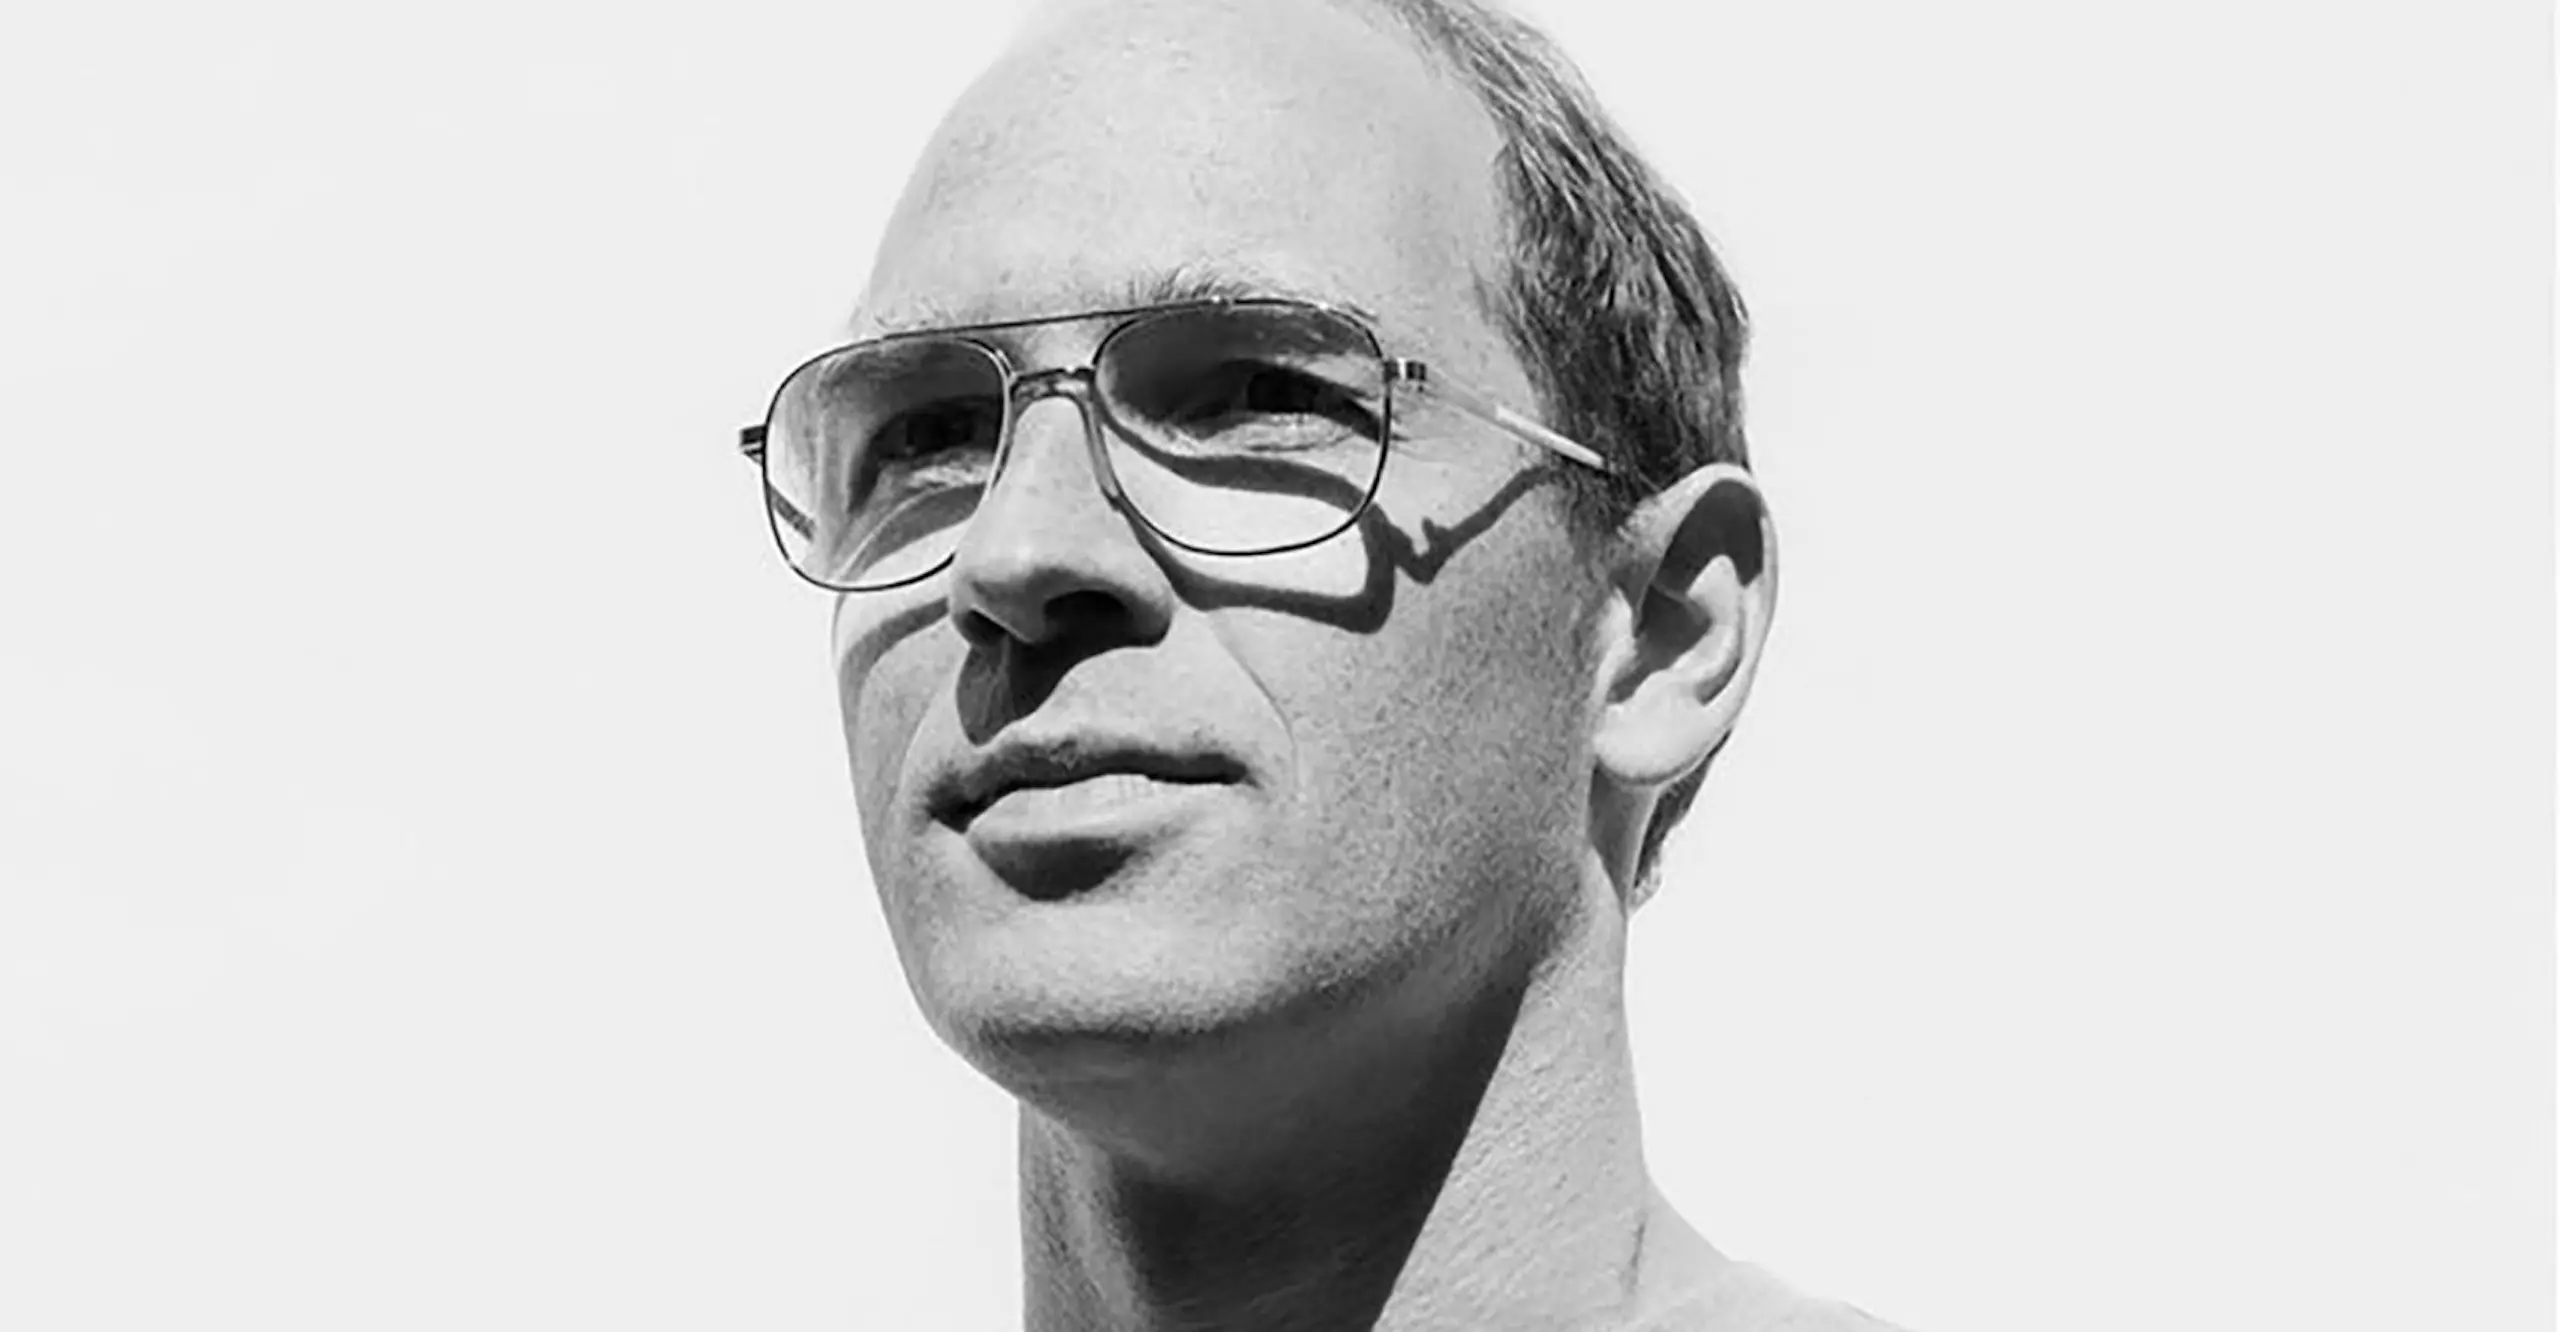 Black and white head and shoulders portrait of a white man wearing aviator style glasses looking off to the right smiling slightly.